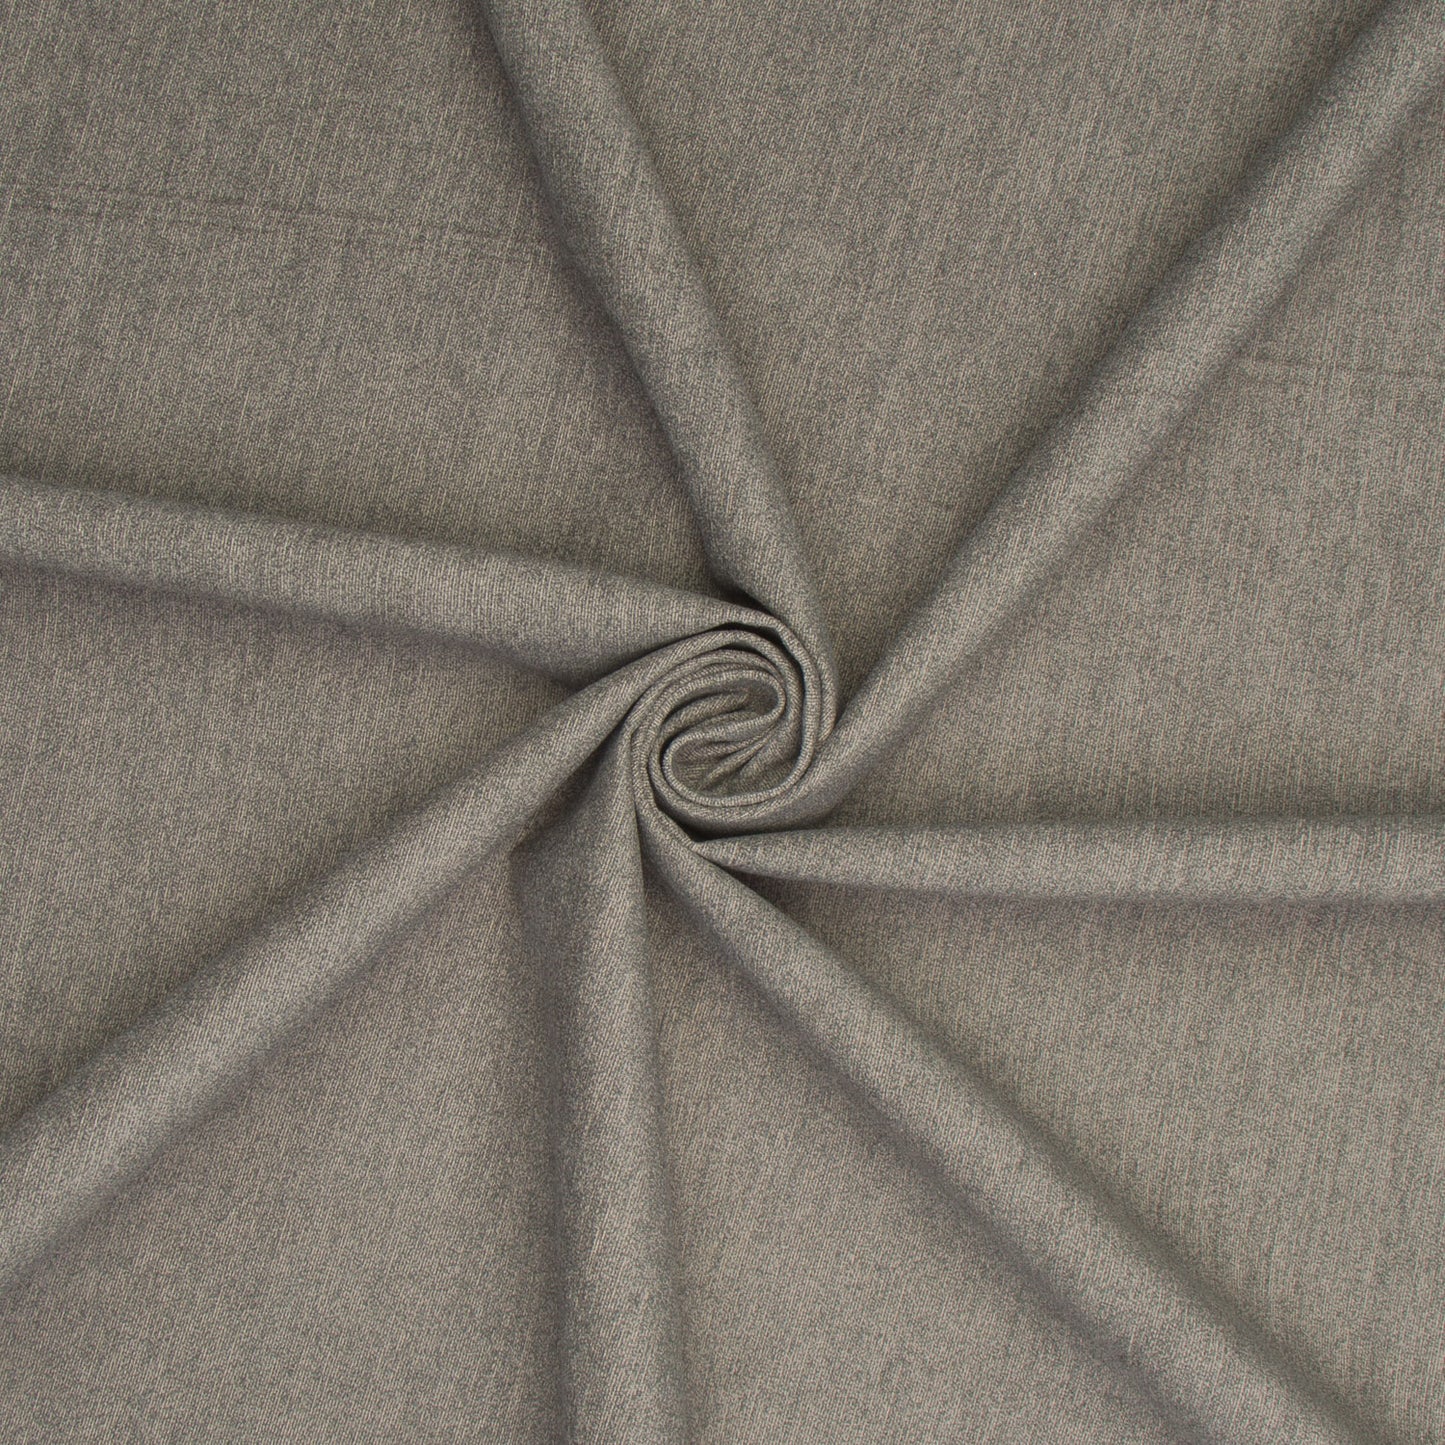 Poetic Upholstery Steeple Grey - To Be Discontinued